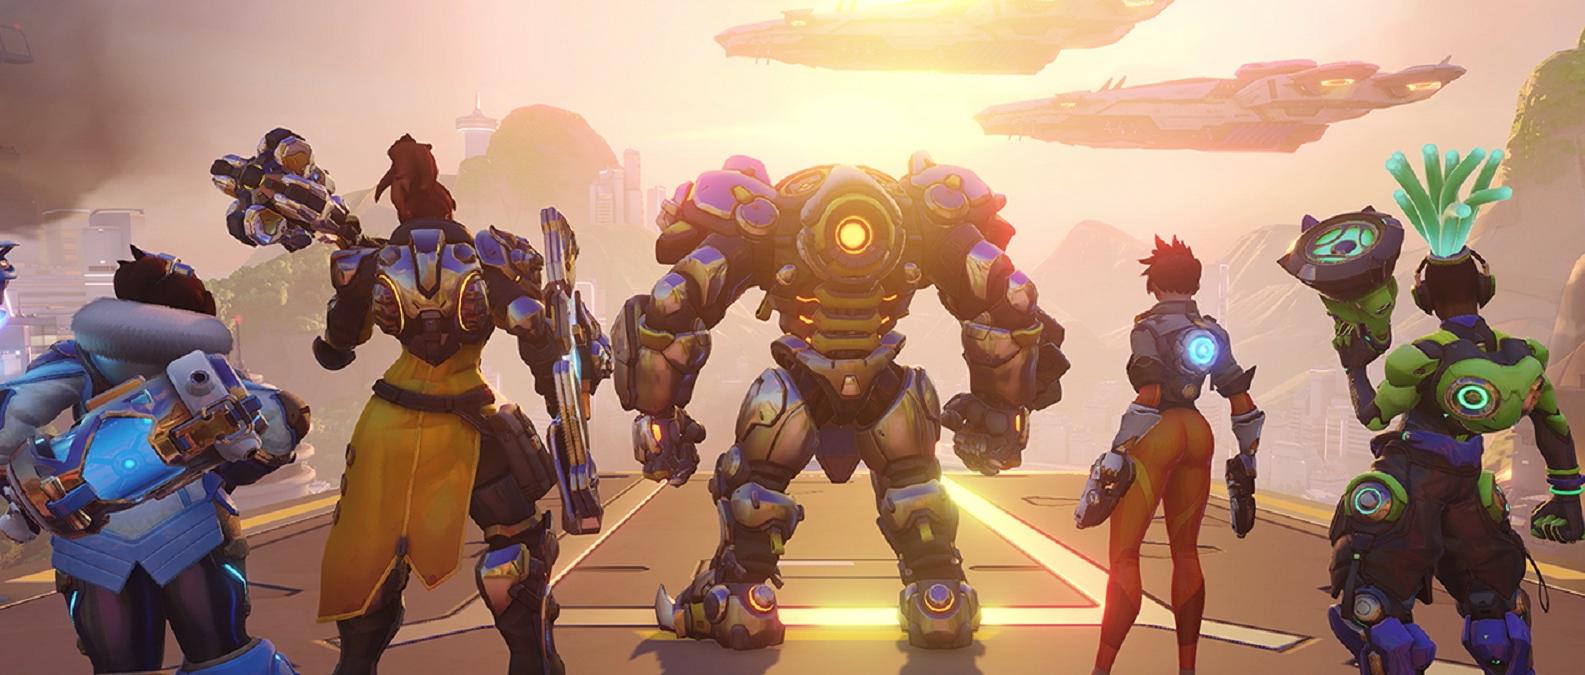 However, Overwatch 2 seems to be a terrible one as soon as it discovers that coveted stories missions are not free or available in one player.